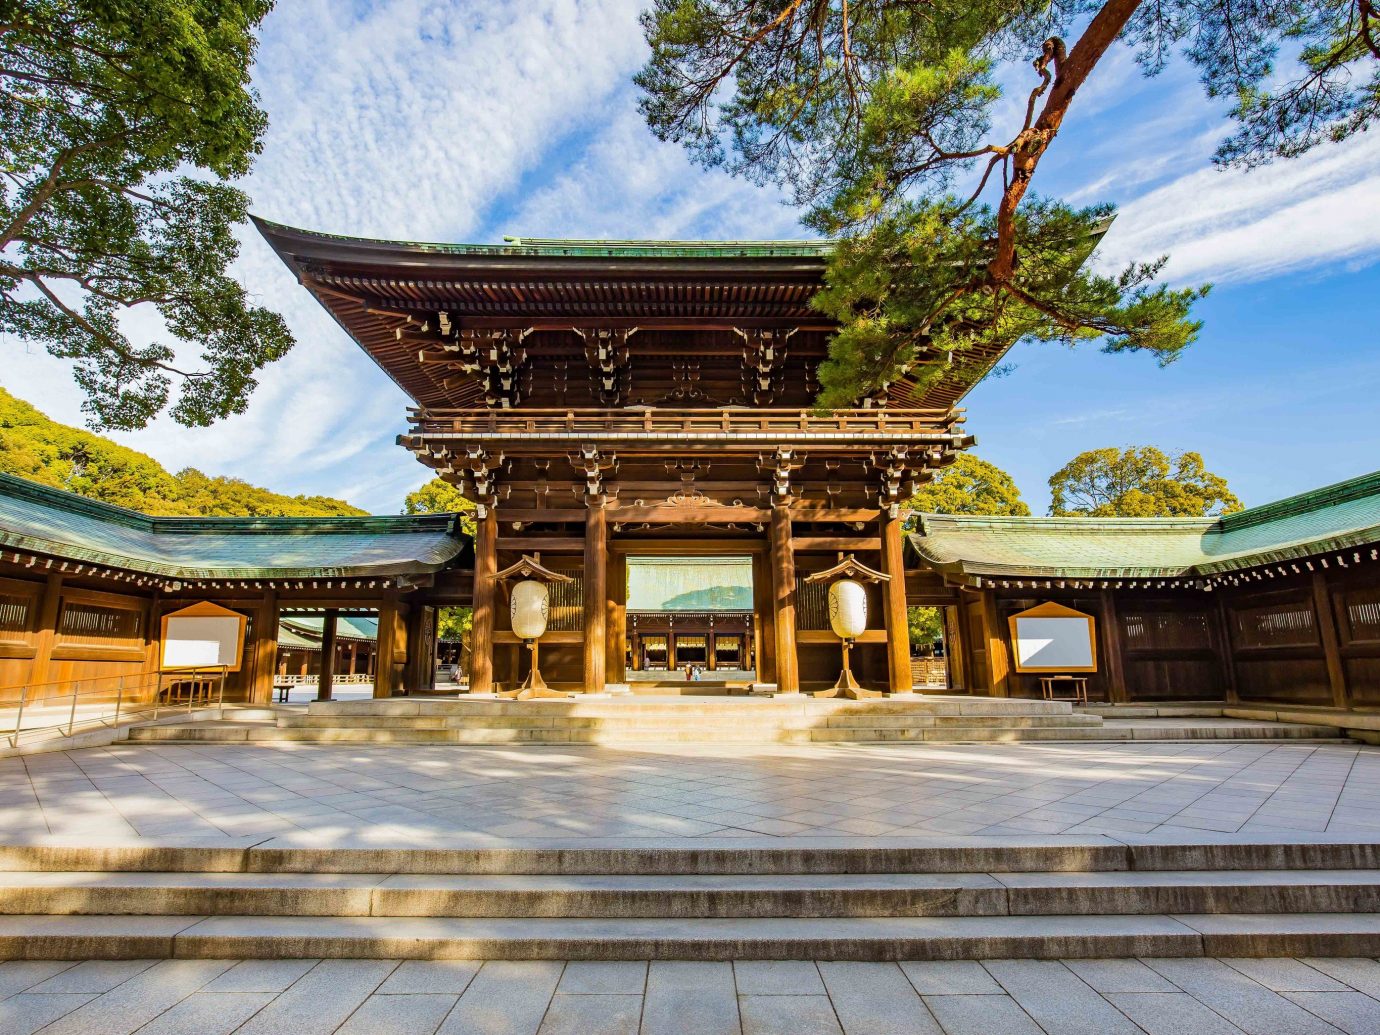 Trip Ideas outdoor tree sky building chinese architecture japanese architecture shinto shrine shrine historic site tourist attraction temple pagoda leisure place of worship estate